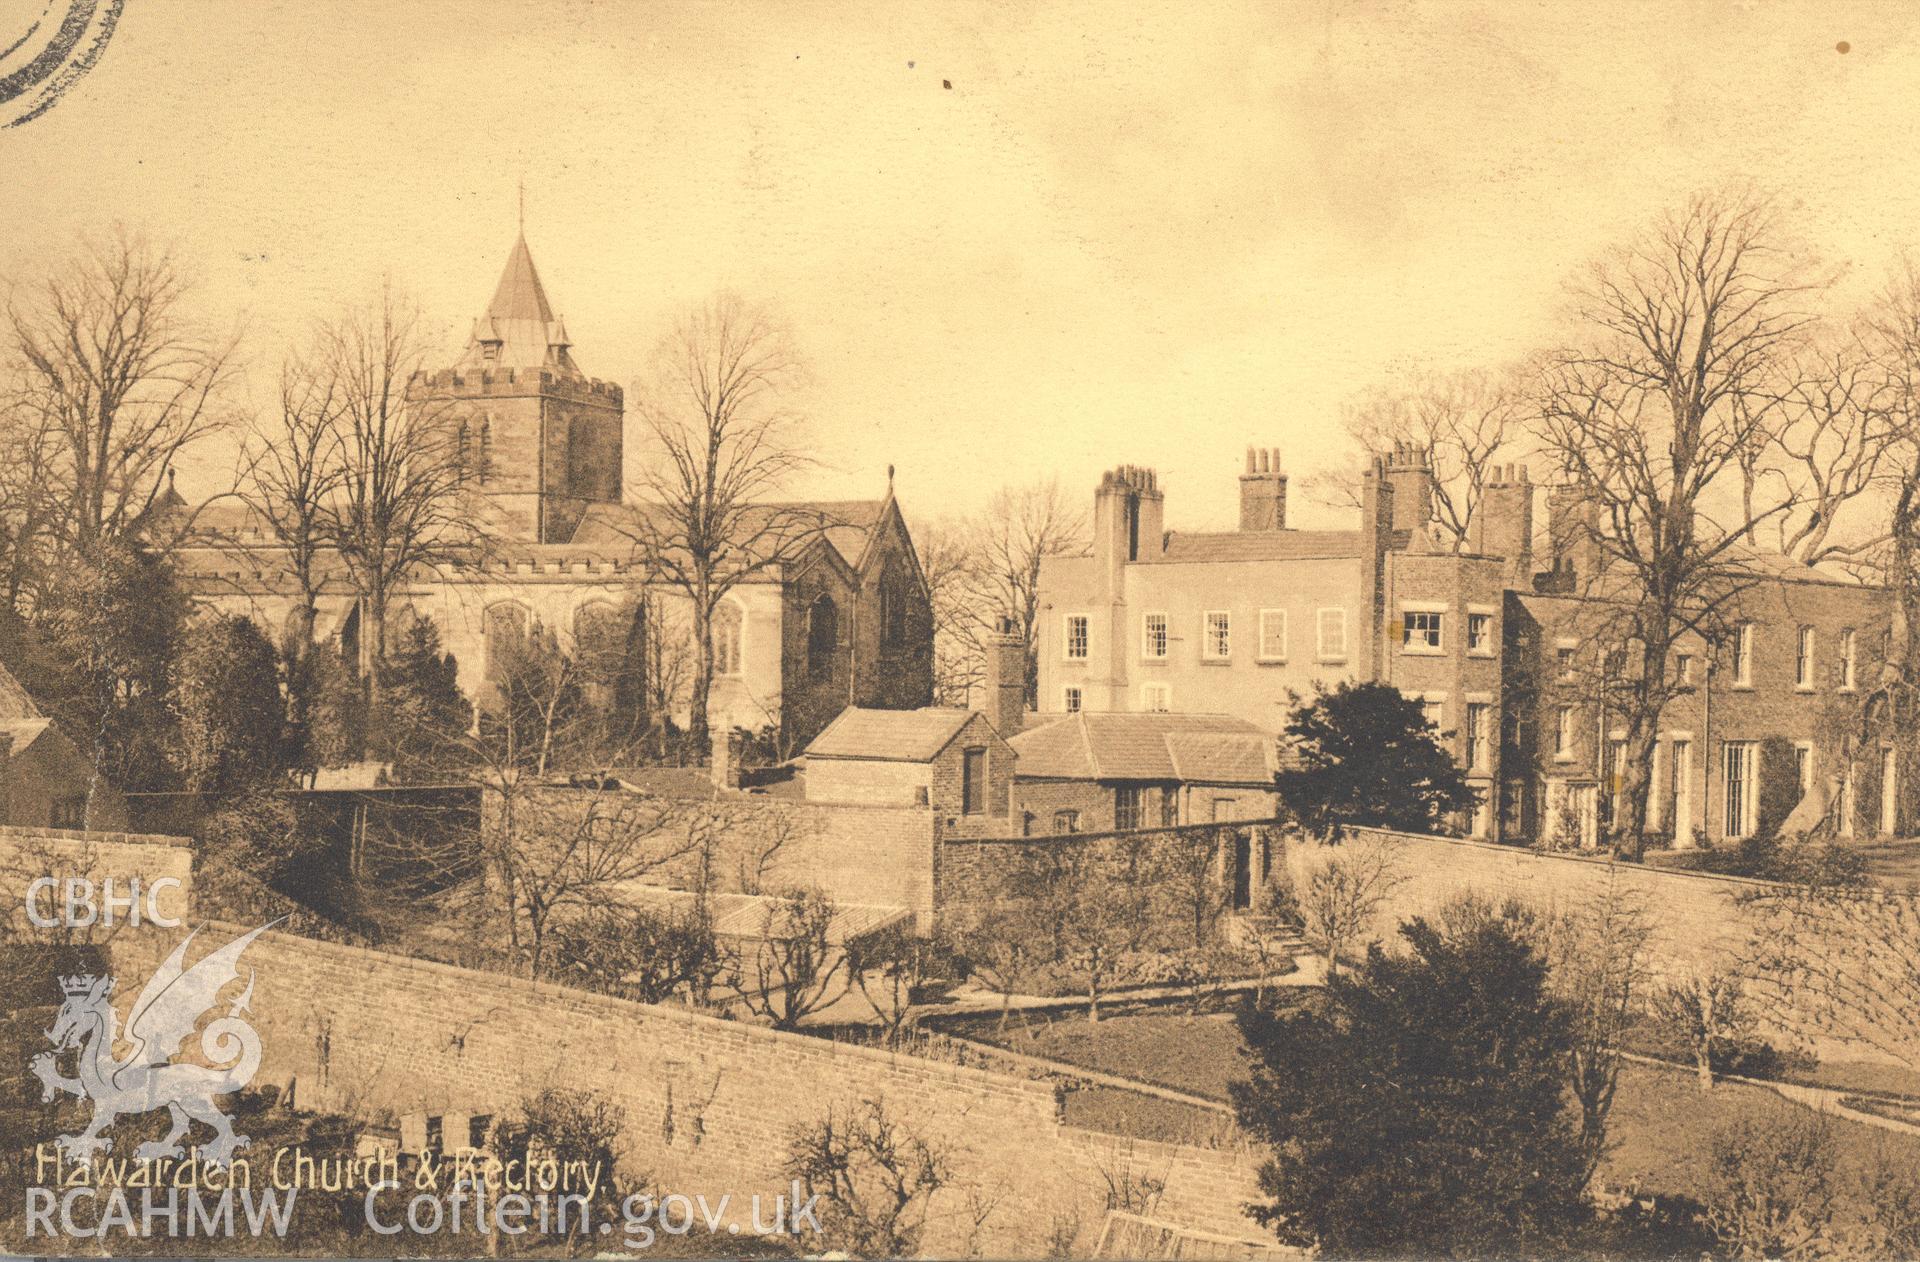 Digitised postcard image of St Deiniol's church and rectory, Harwarden, W.B. Jones, Post Office, Harwarden. Produced by Parks and Gardens Data Services, from an original item in the Peter Davis Collection at Parks and Gardens UK. We hold only web-resolution images of this collection, suitable for viewing on screen and for research purposes only. We do not hold the original images, or publication quality scans.